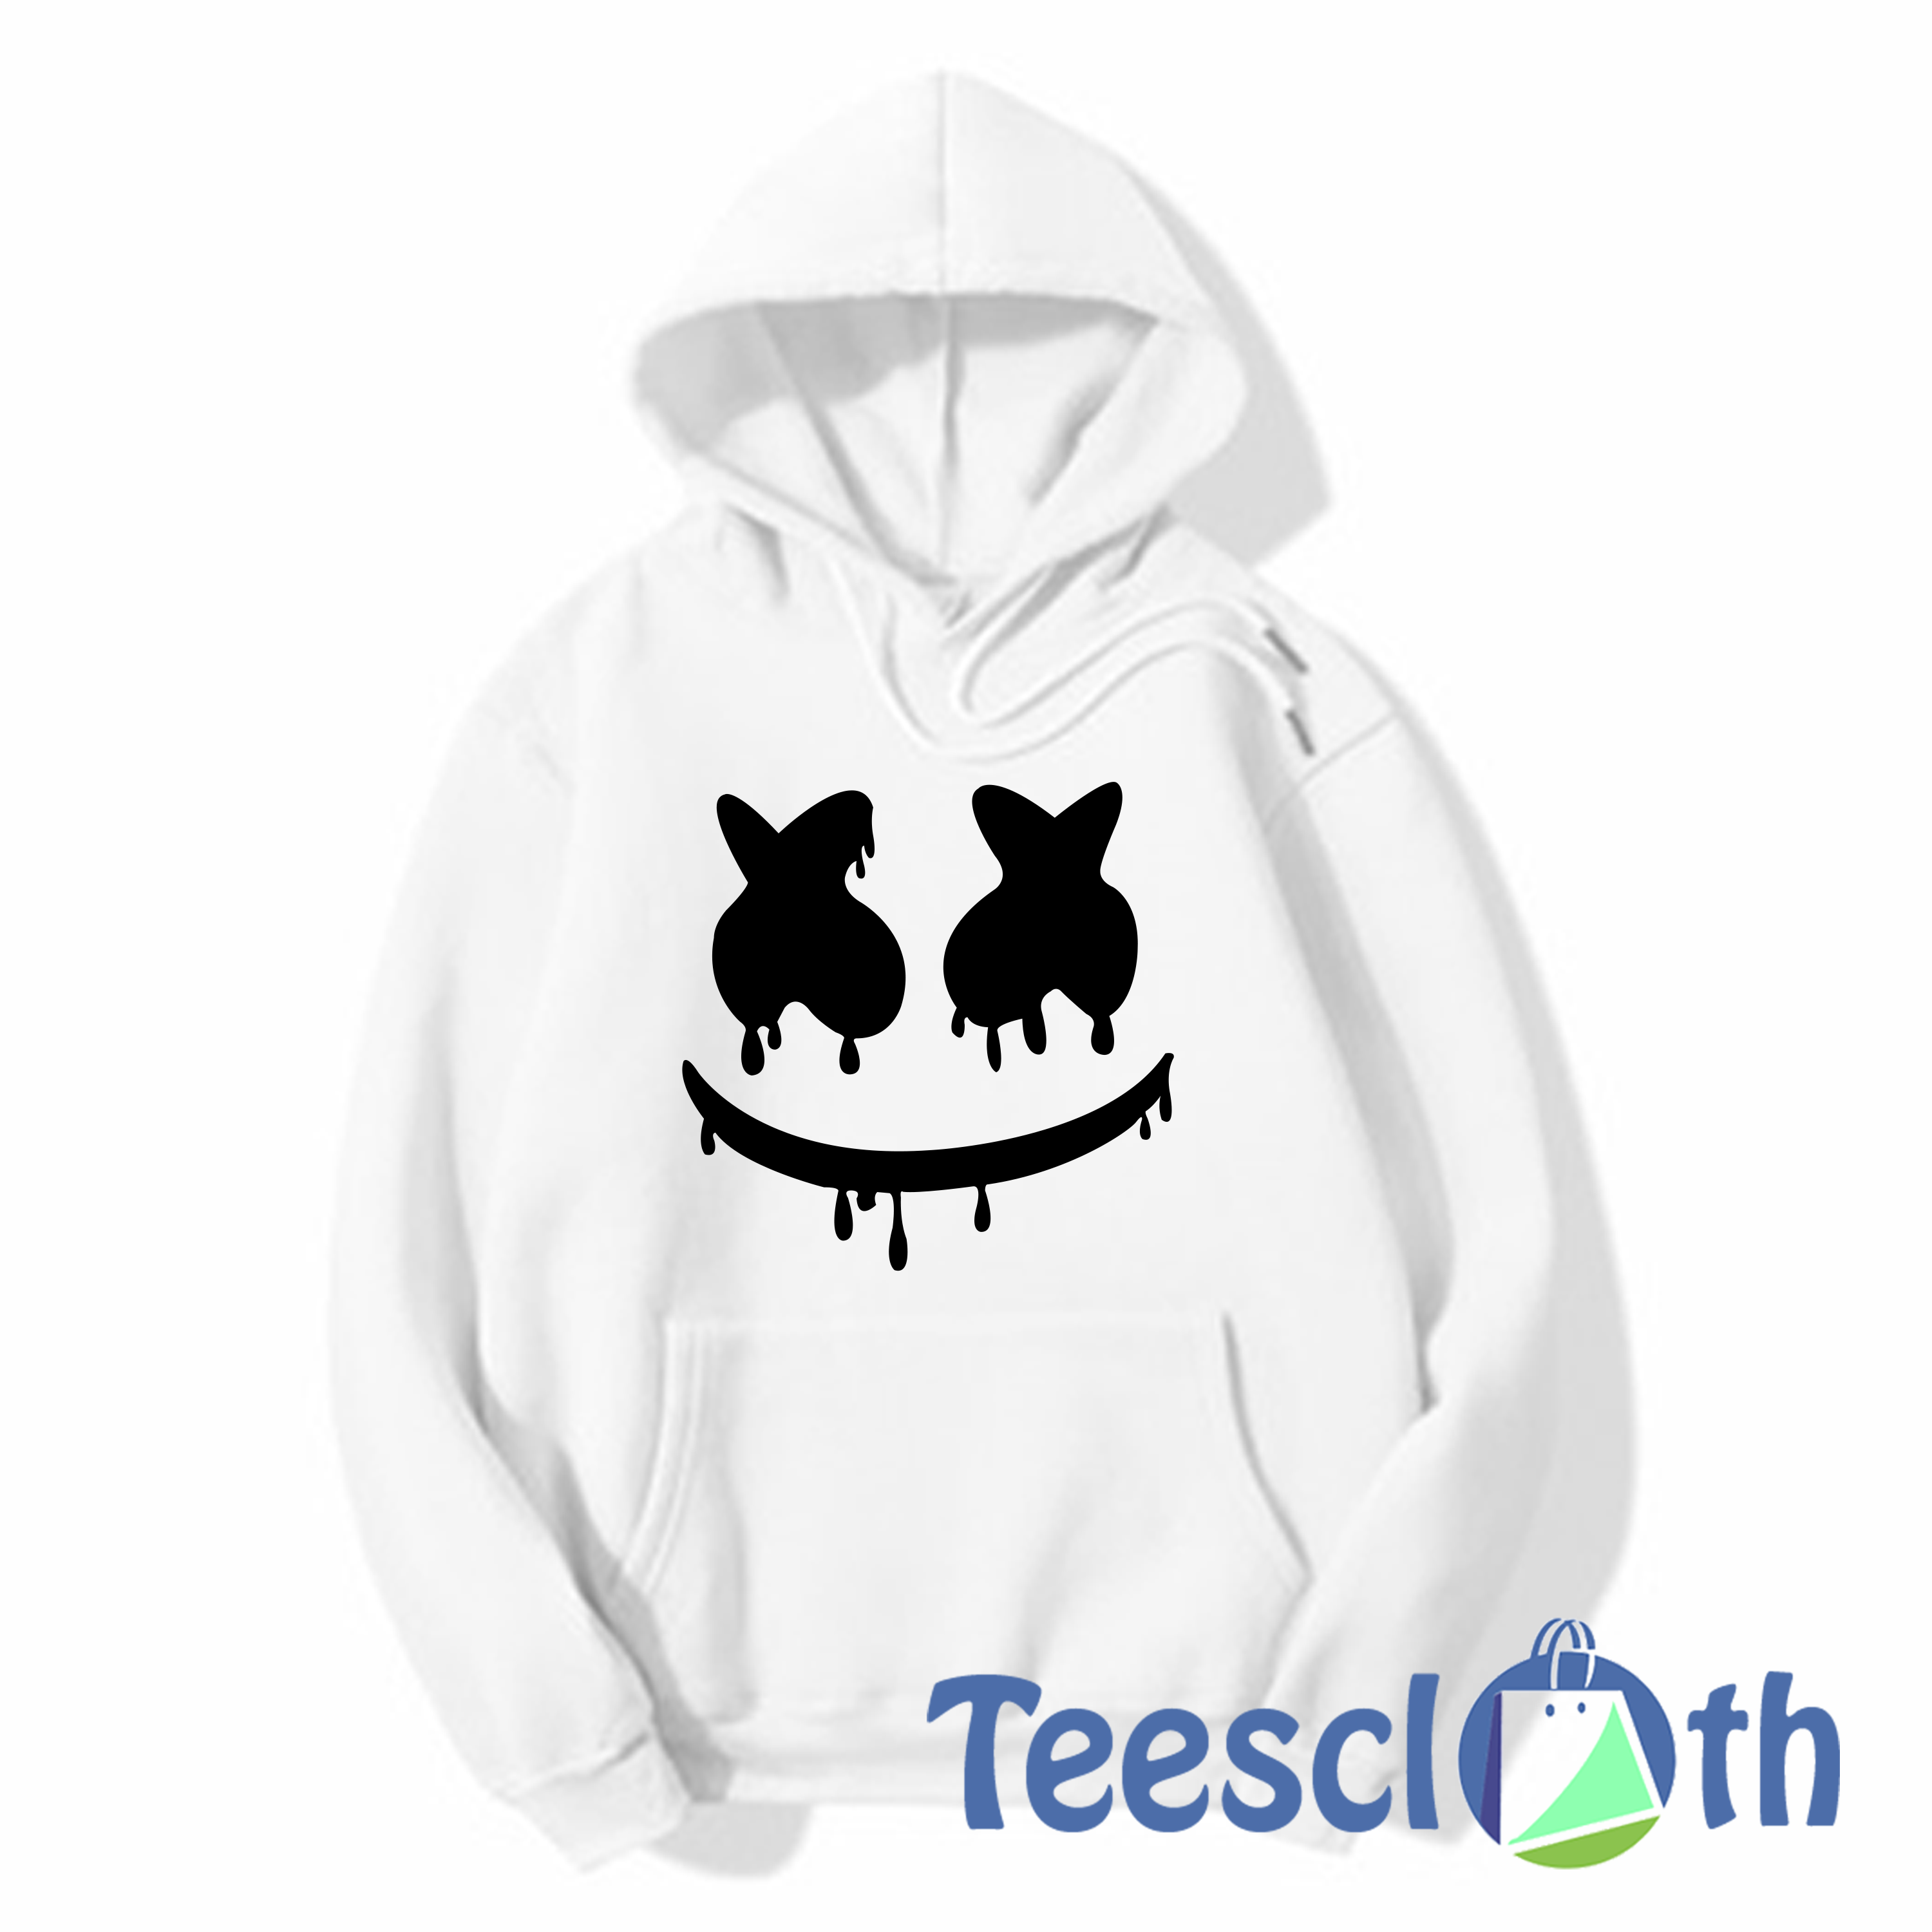 Advarsel Implement Normal Marshmello Mask Printed Hoodie Unisex Adult Size S to 3XL